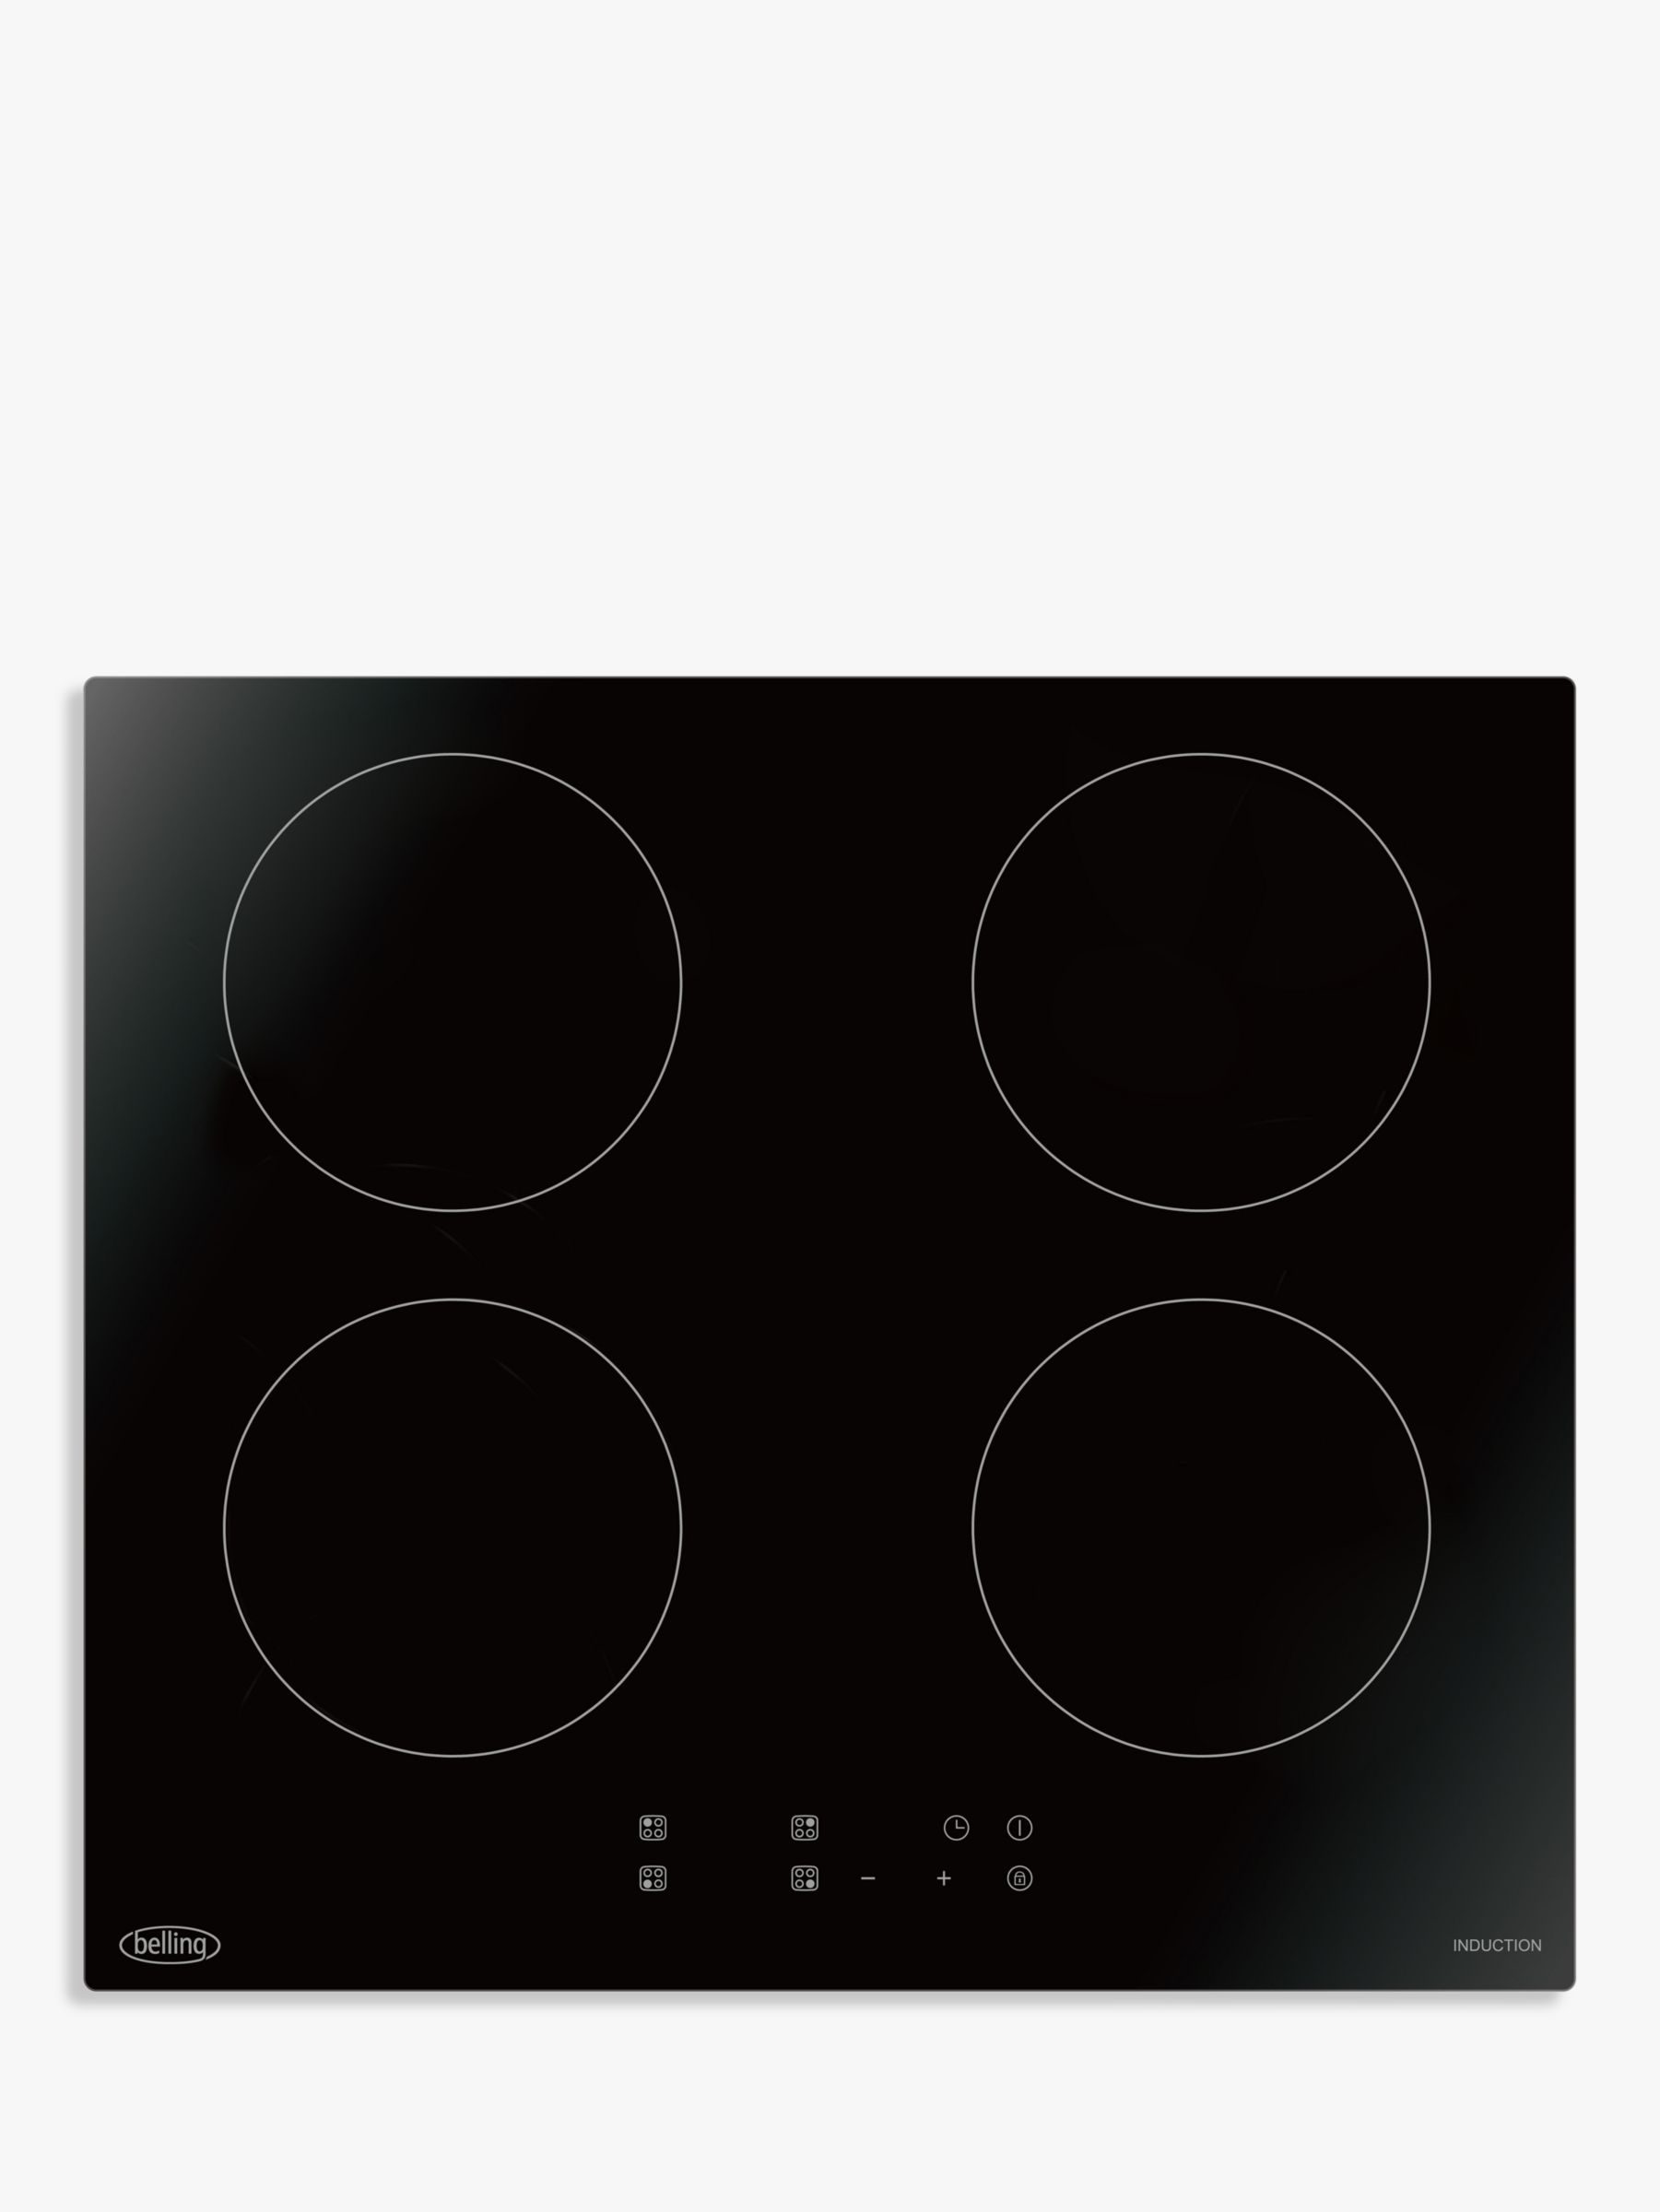 Belling IHT602 Induction Digital Touch Control Hob, Black